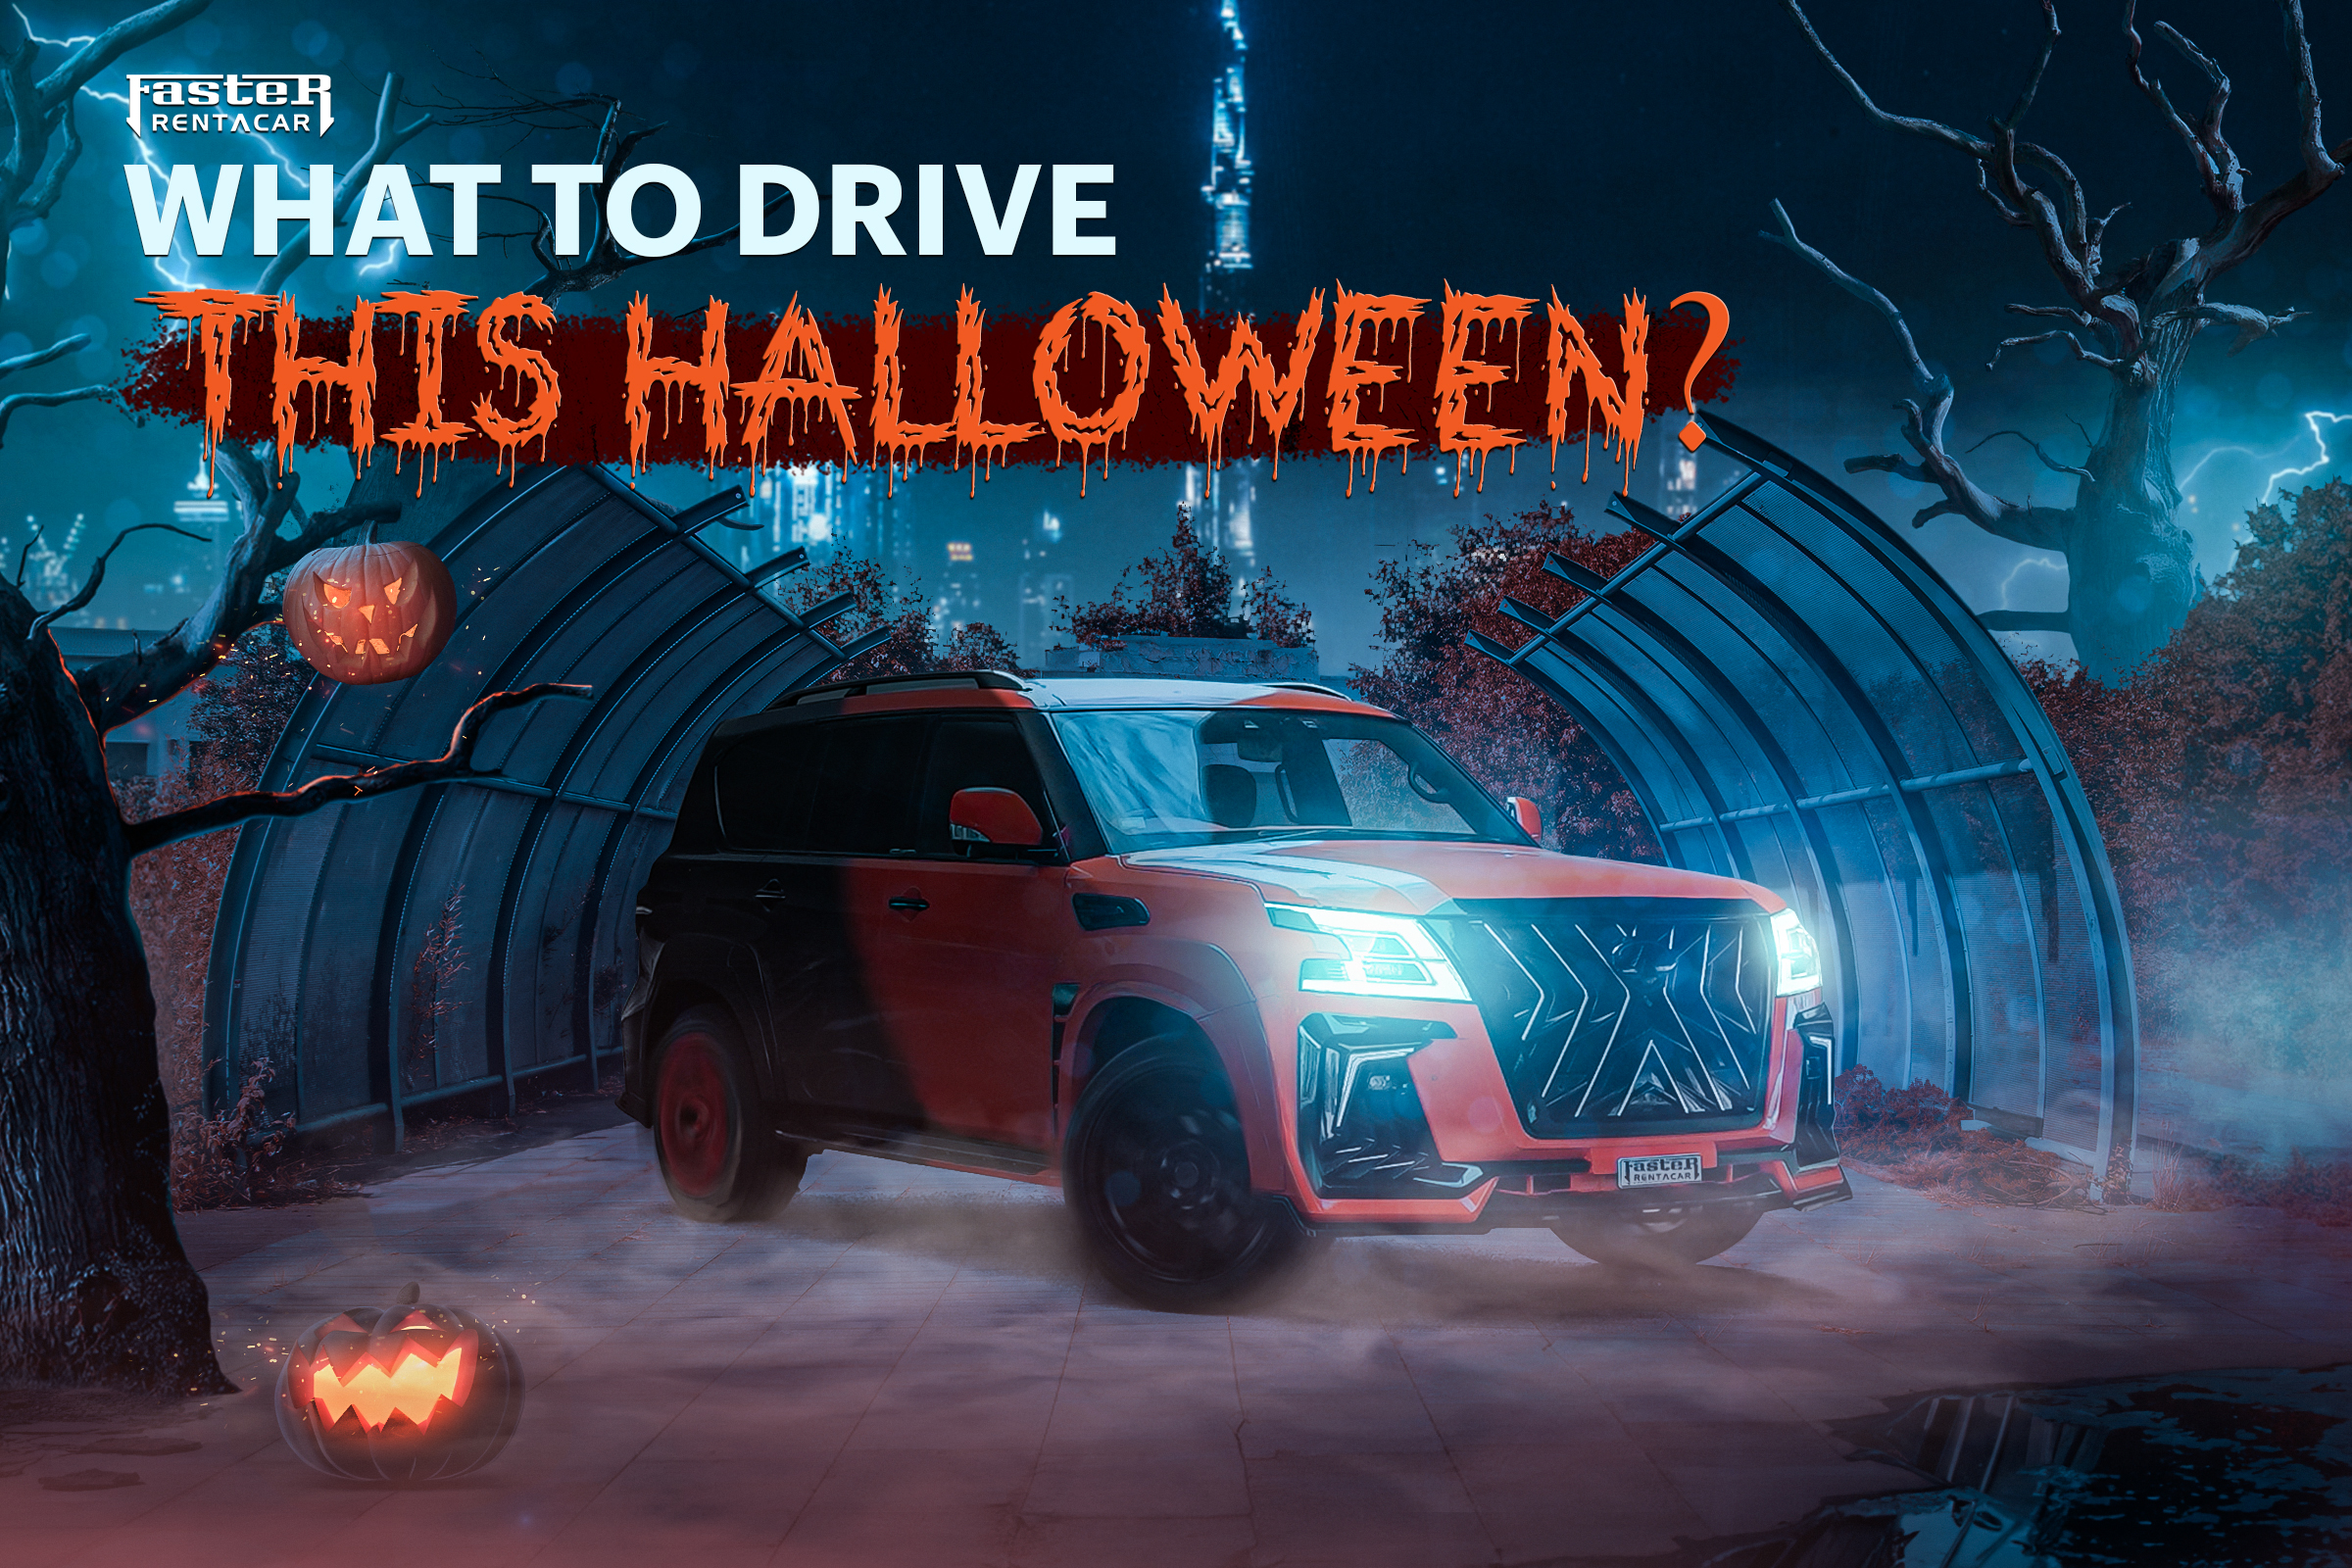 What to Drive this Halloween with Golden Vip  in Dubai?